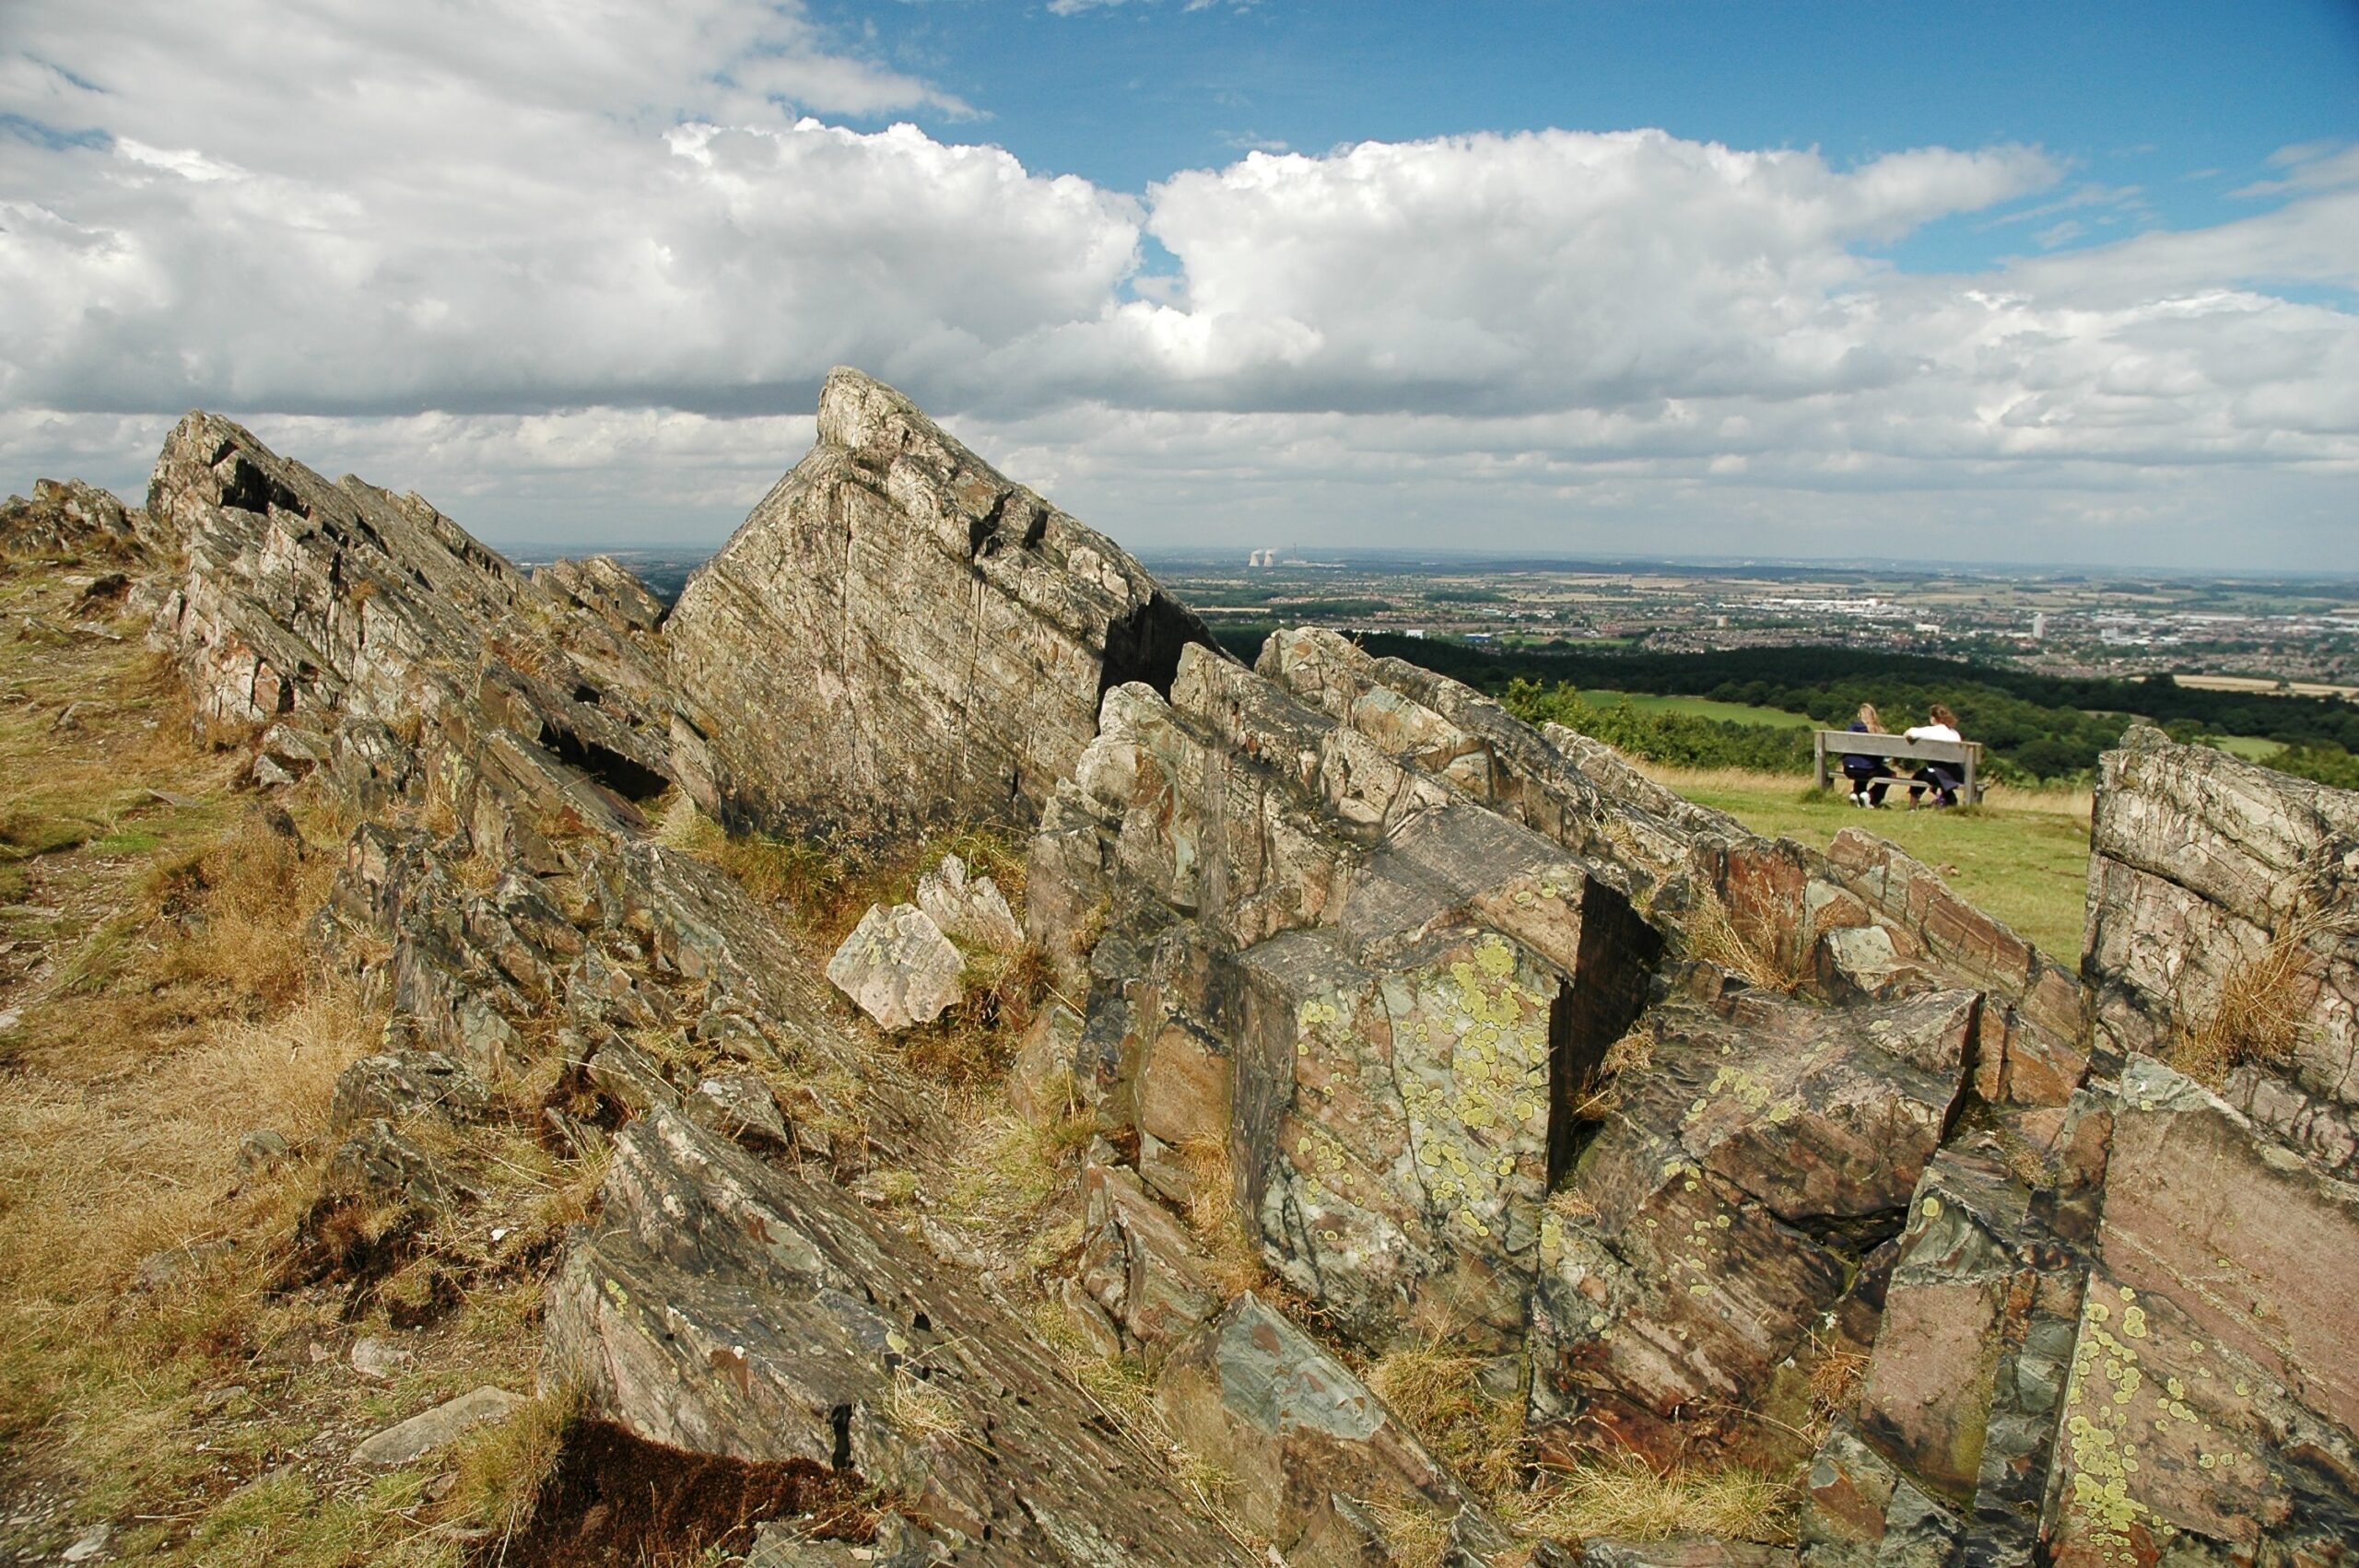 Inclined layers of rock at Beacon Hill. In the middle distance two people sit on a bench admiring the view over Loughborough.